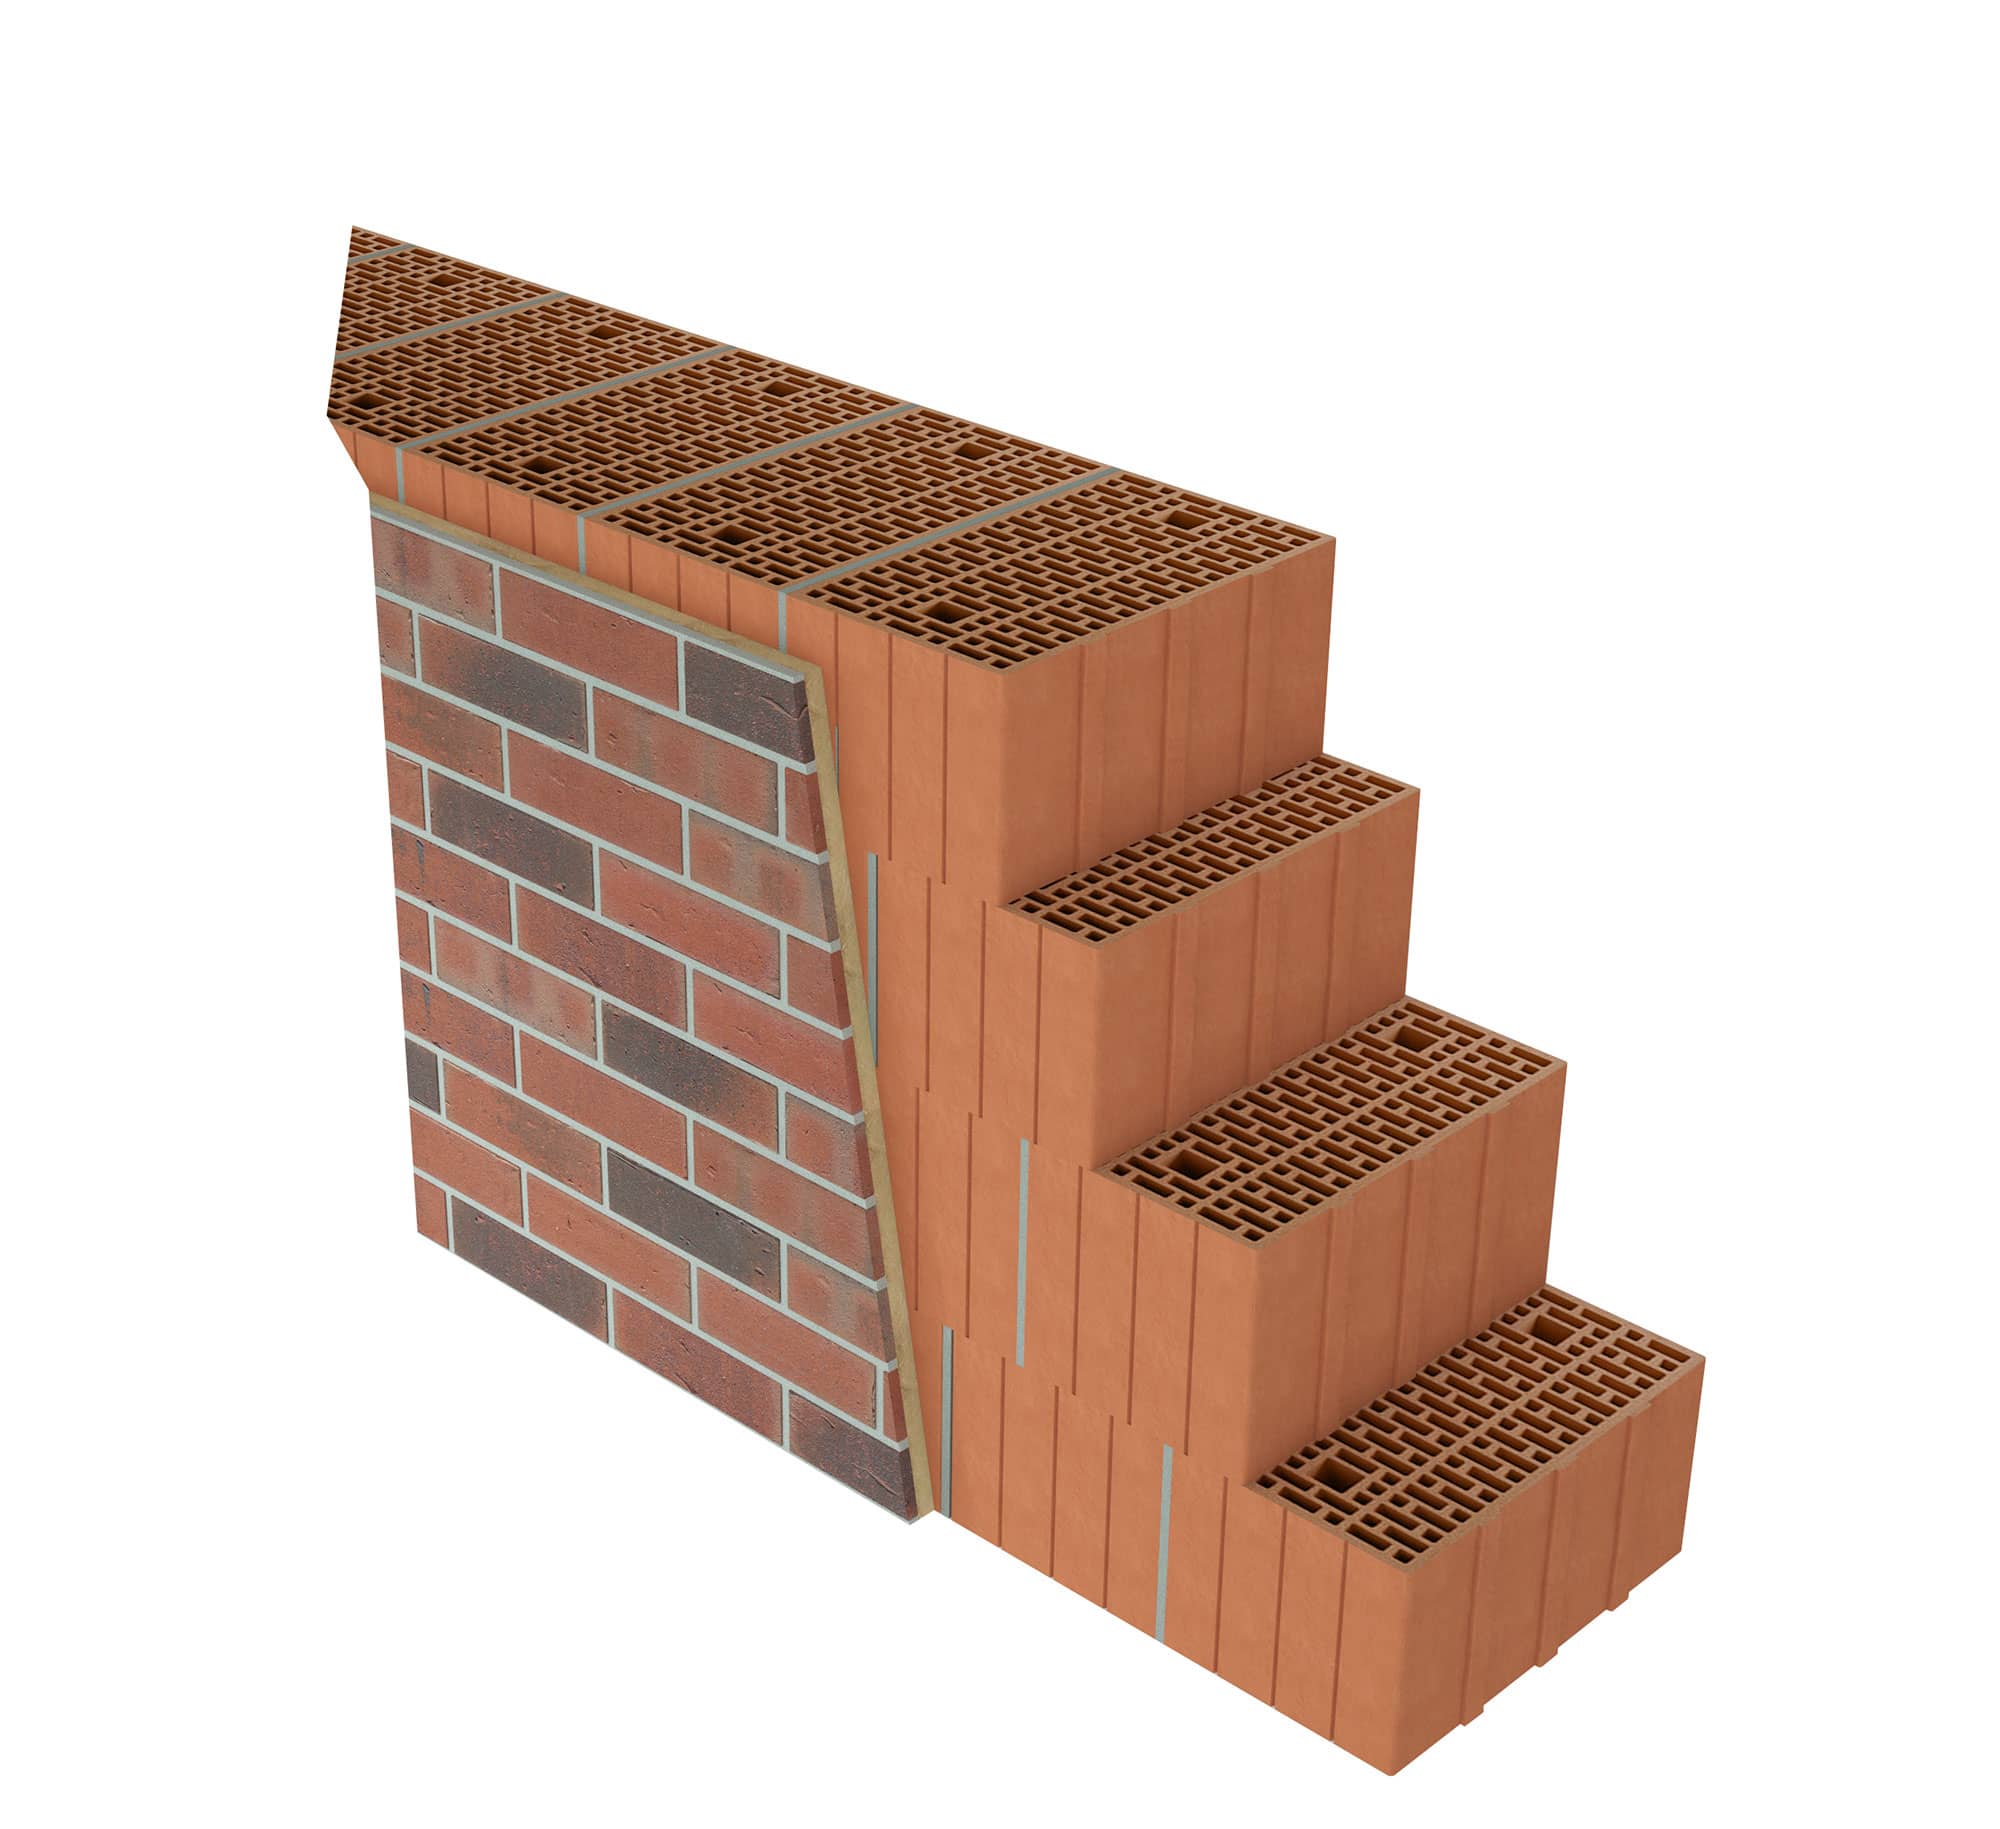 System kess on vertically perforated bricks